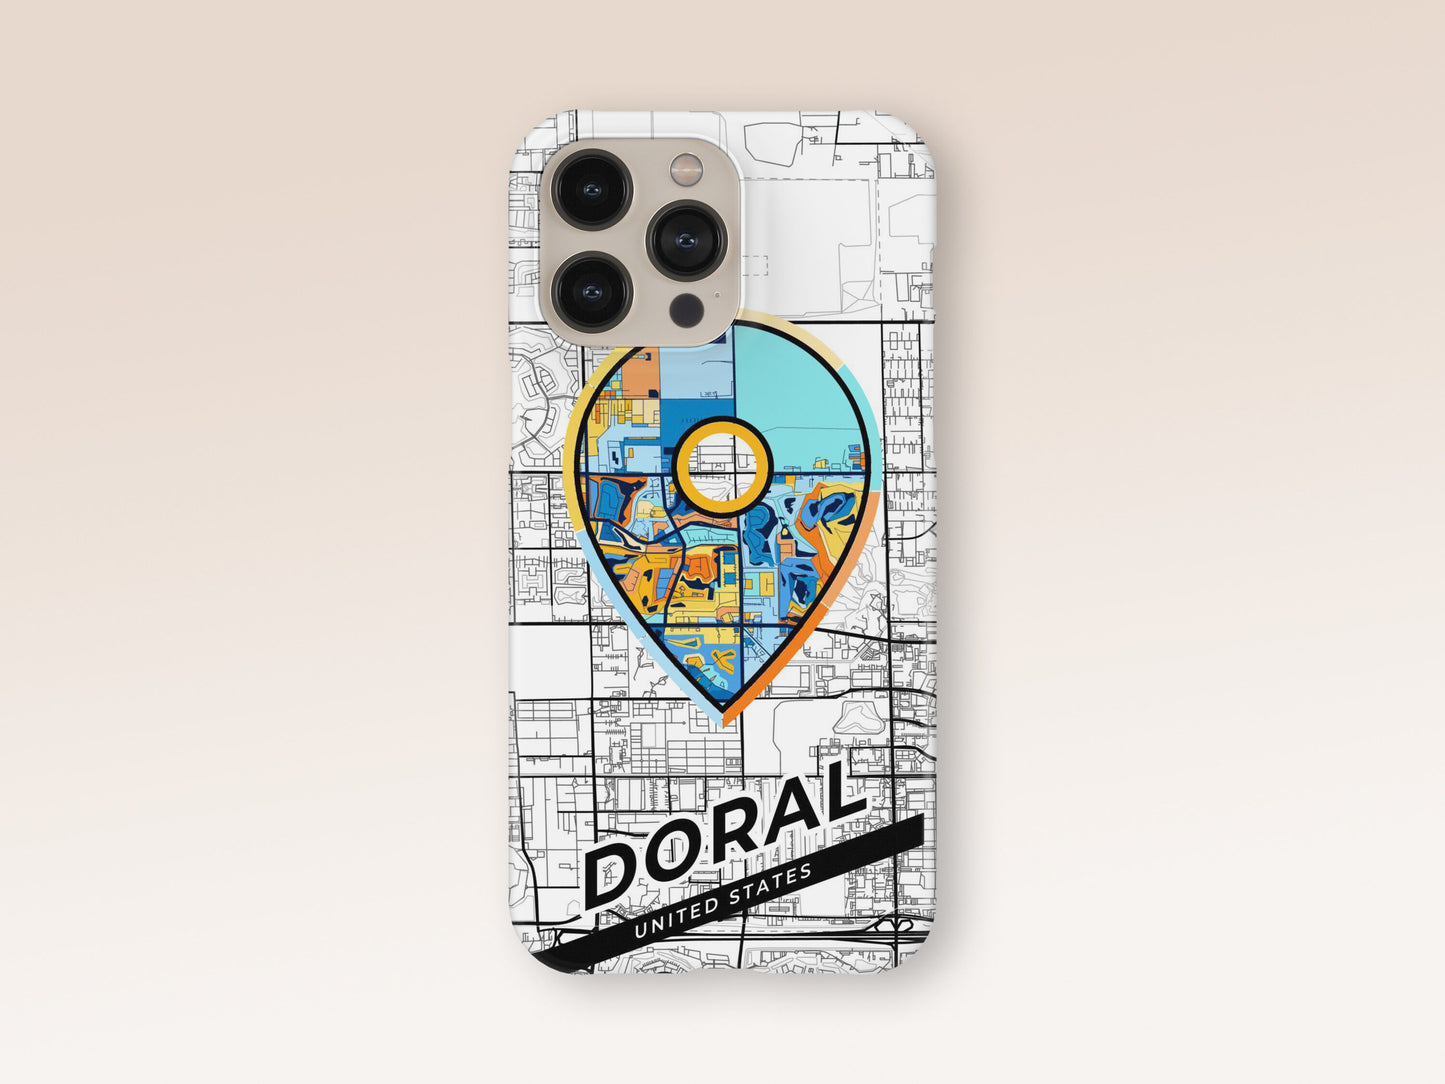 Doral Florida slim phone case with colorful icon. Birthday, wedding or housewarming gift. Couple match cases. 1